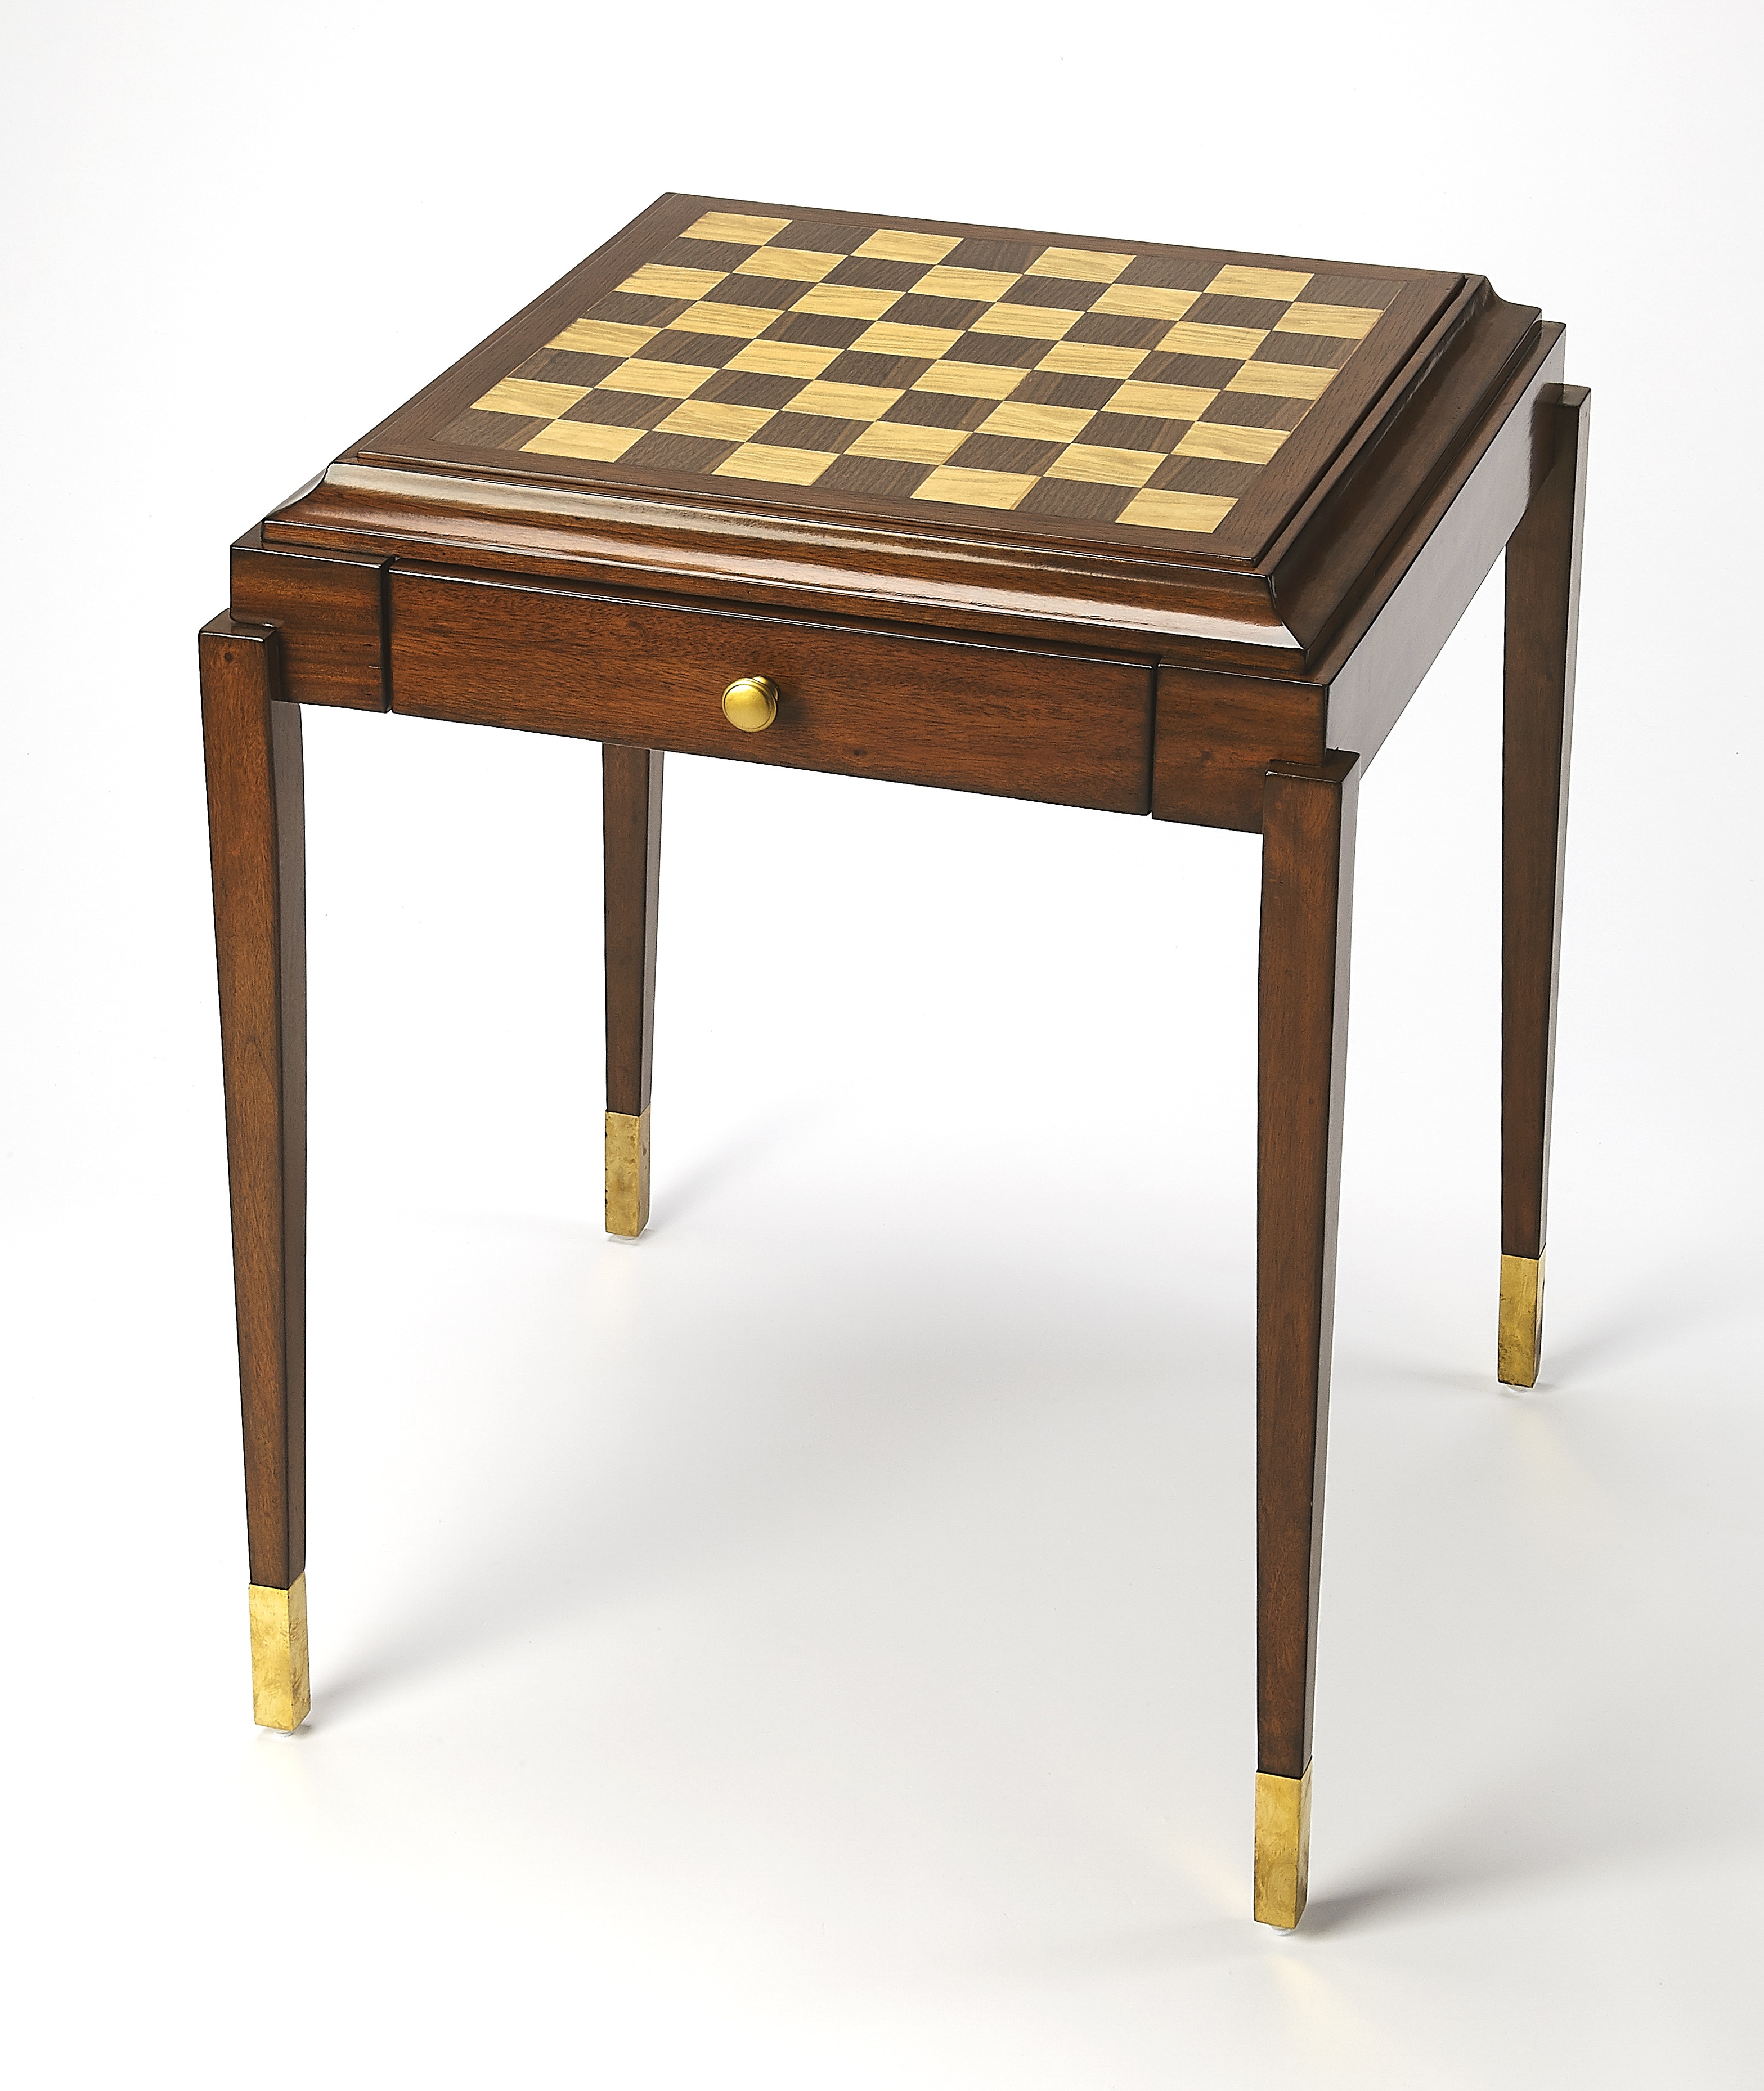 Specialty Adrian 4461011 Living Room Butler Chicago, Specialty - Company - Table IL Butler Game